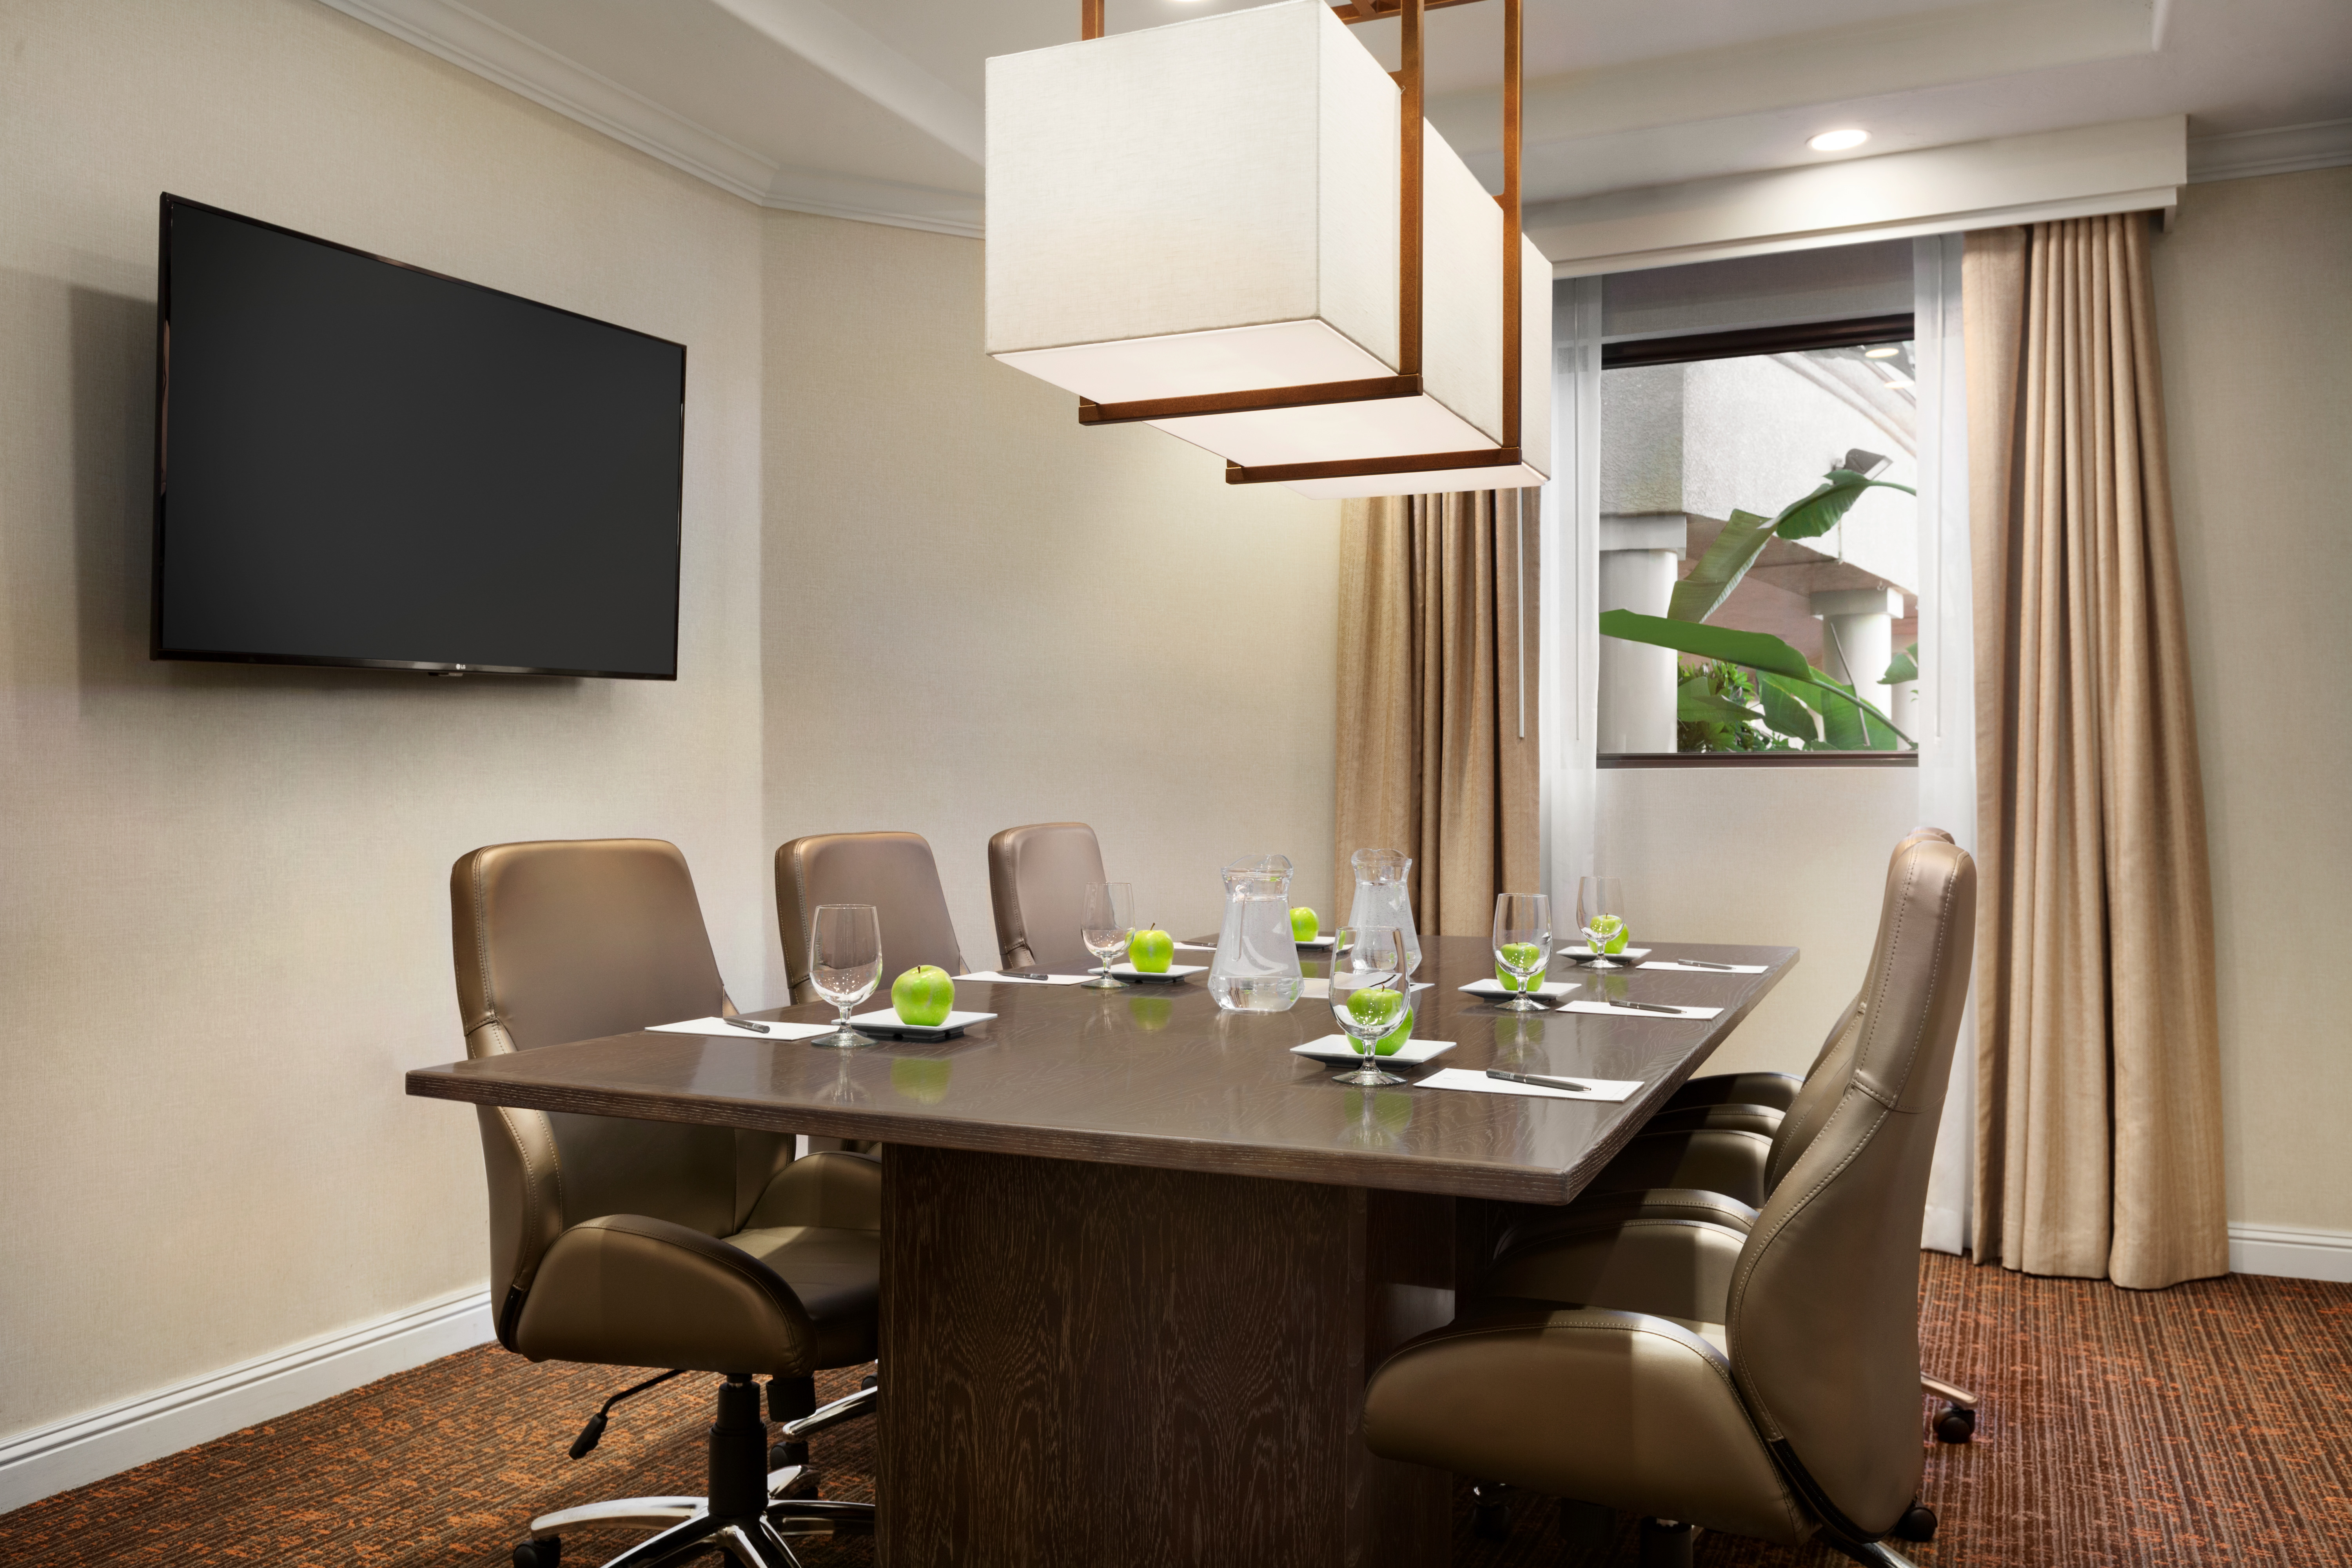 Boardroom with Conference Table, Outside View and Wall Mounted Television